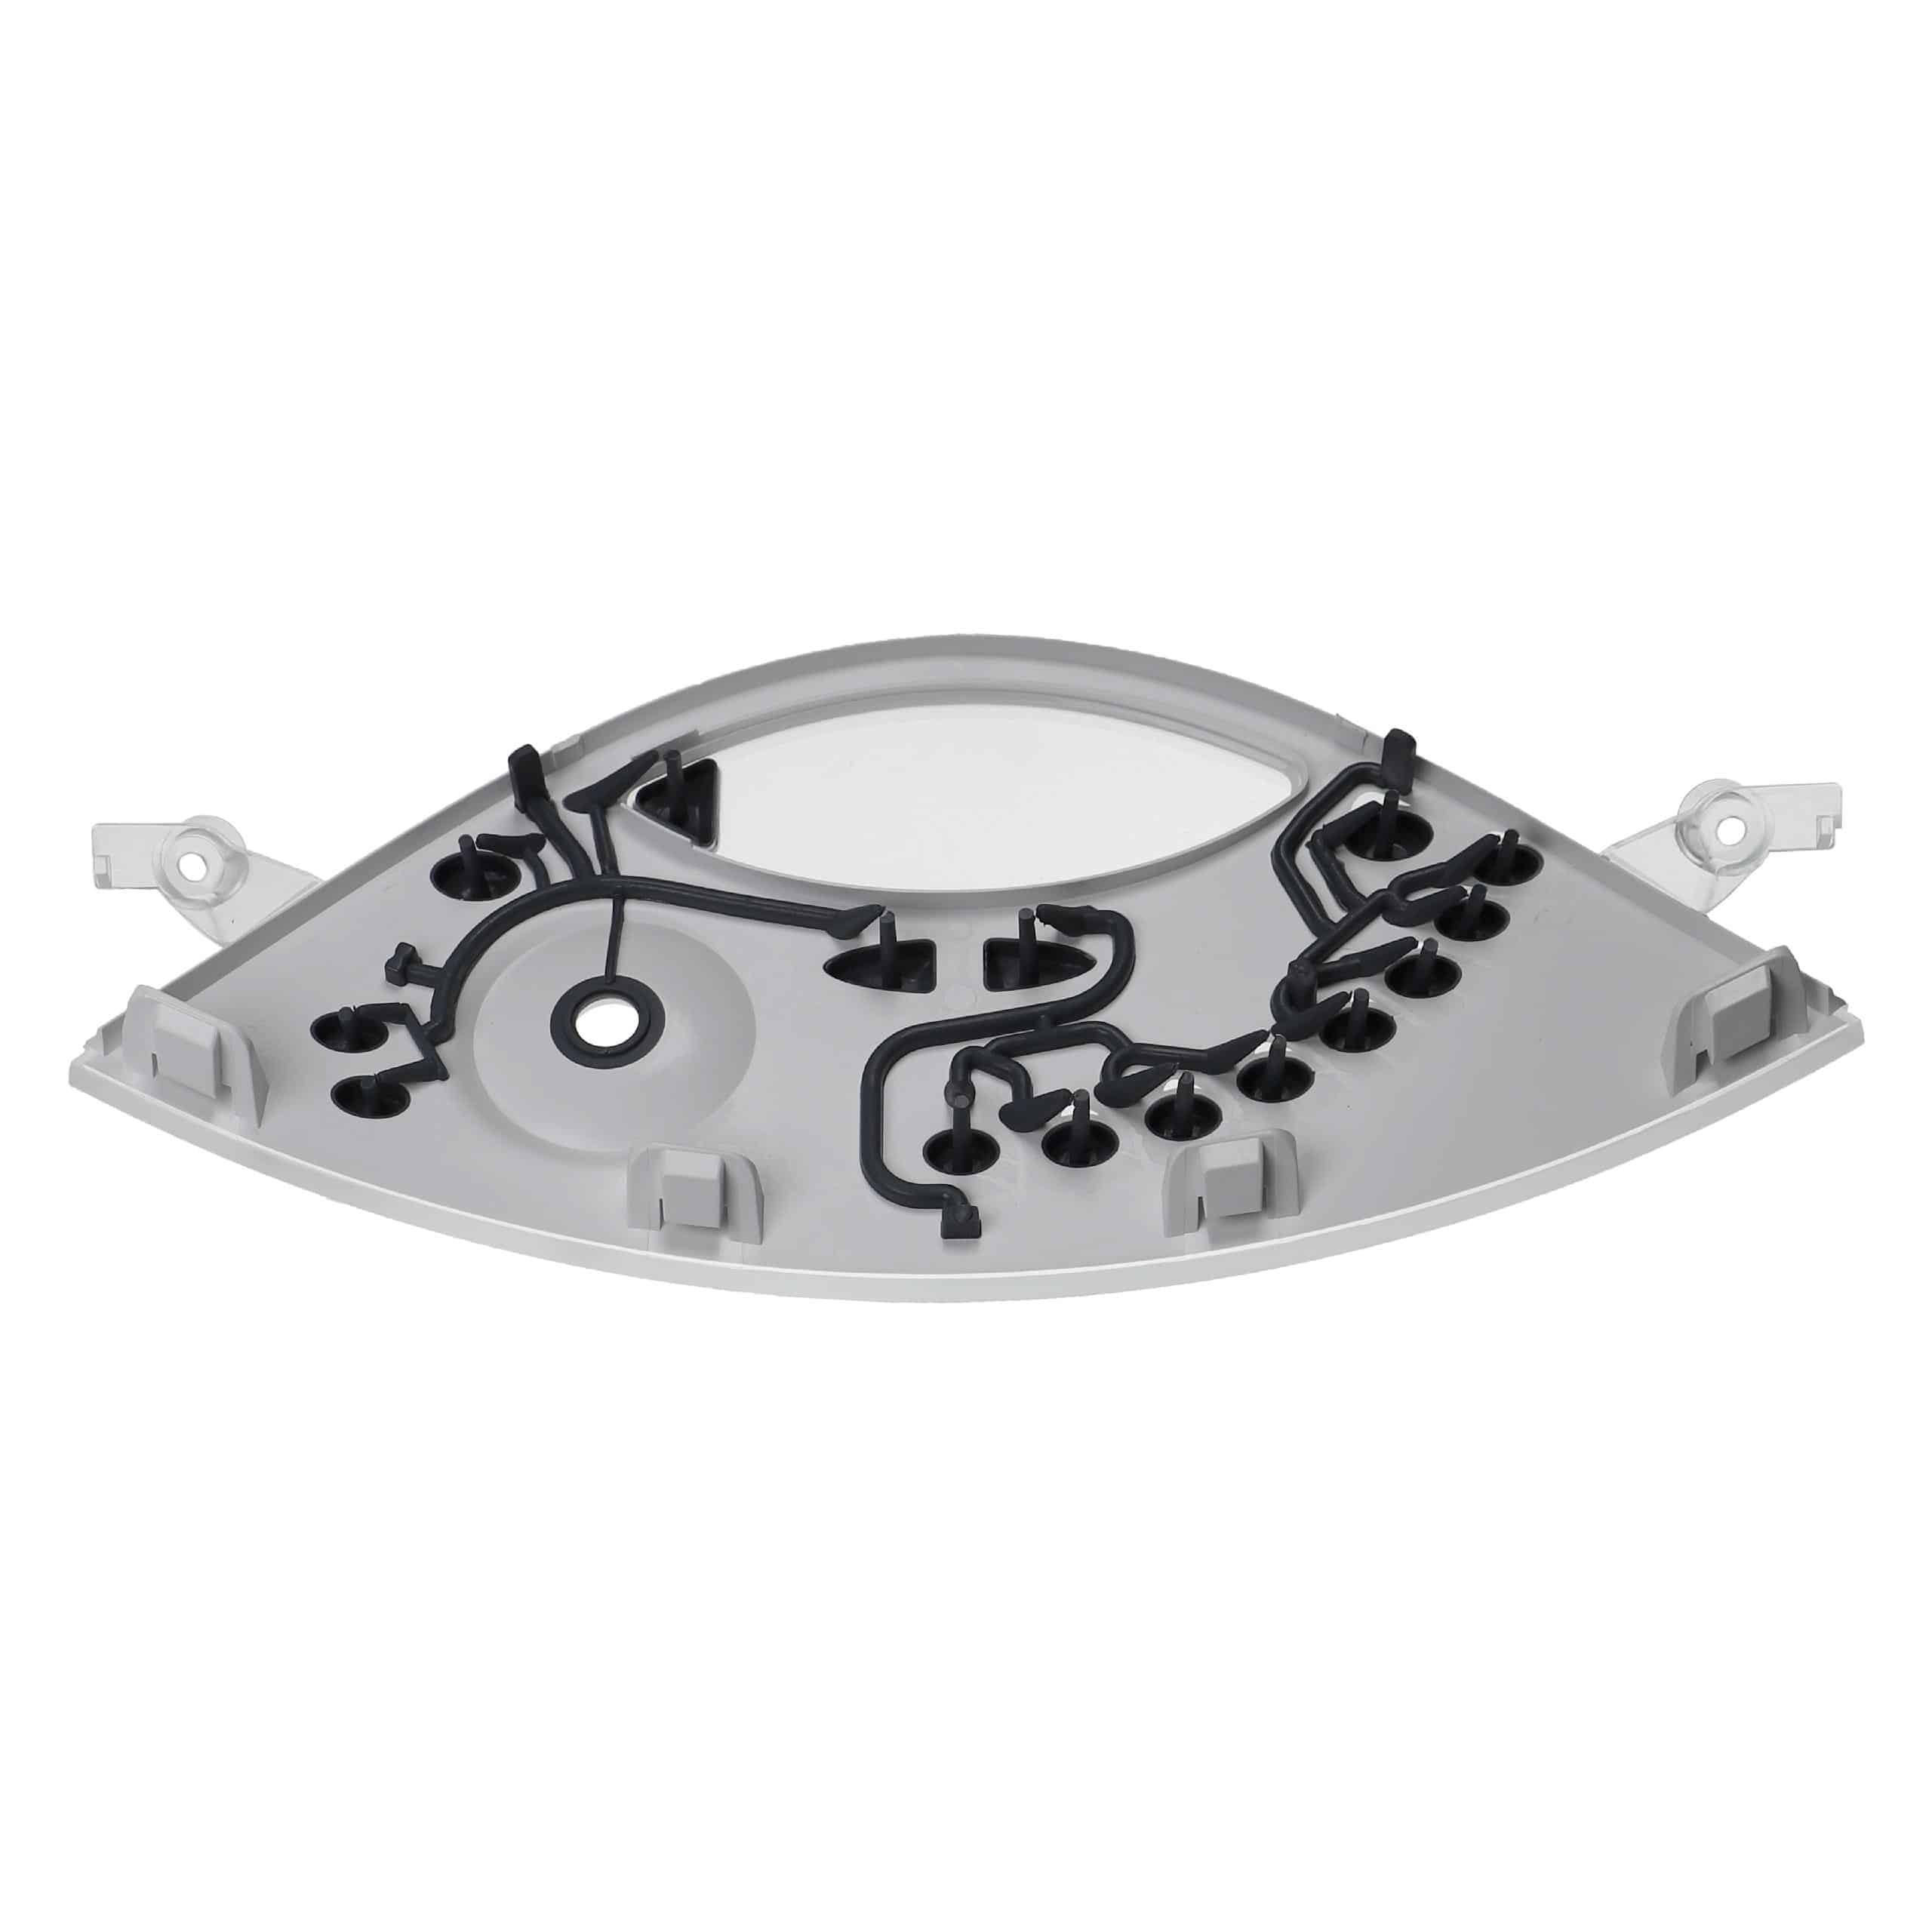 Front Panel Replacement suitable for Vorwerk Thermomix TM31 - Spare Part Black Grey White